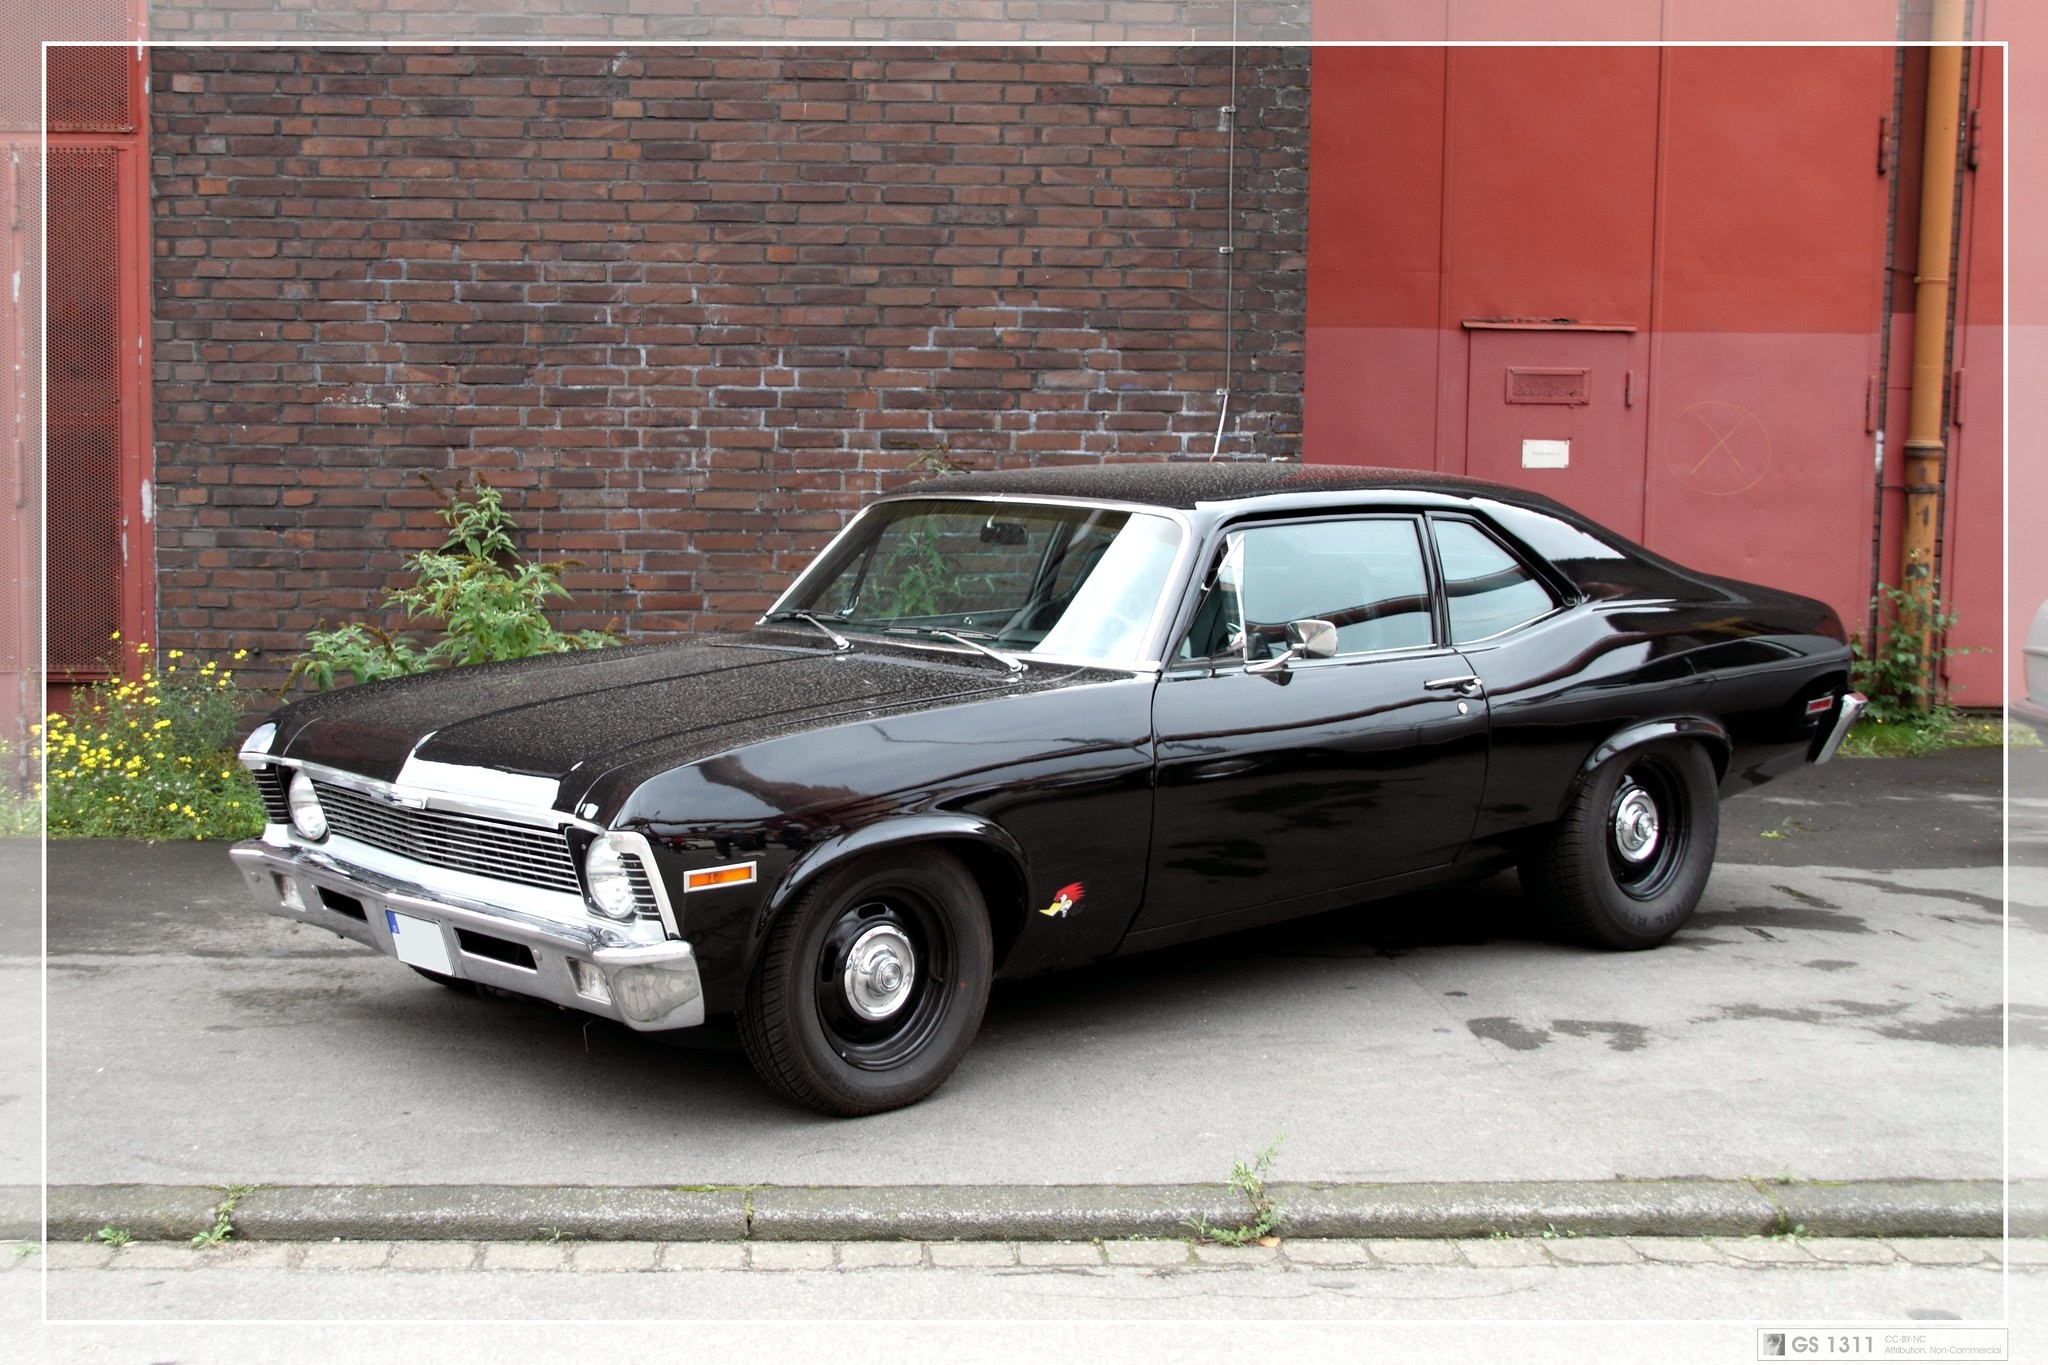 Oregon Woman's Stolen Chevrolet Nova SS Recovered After 13 Long Years